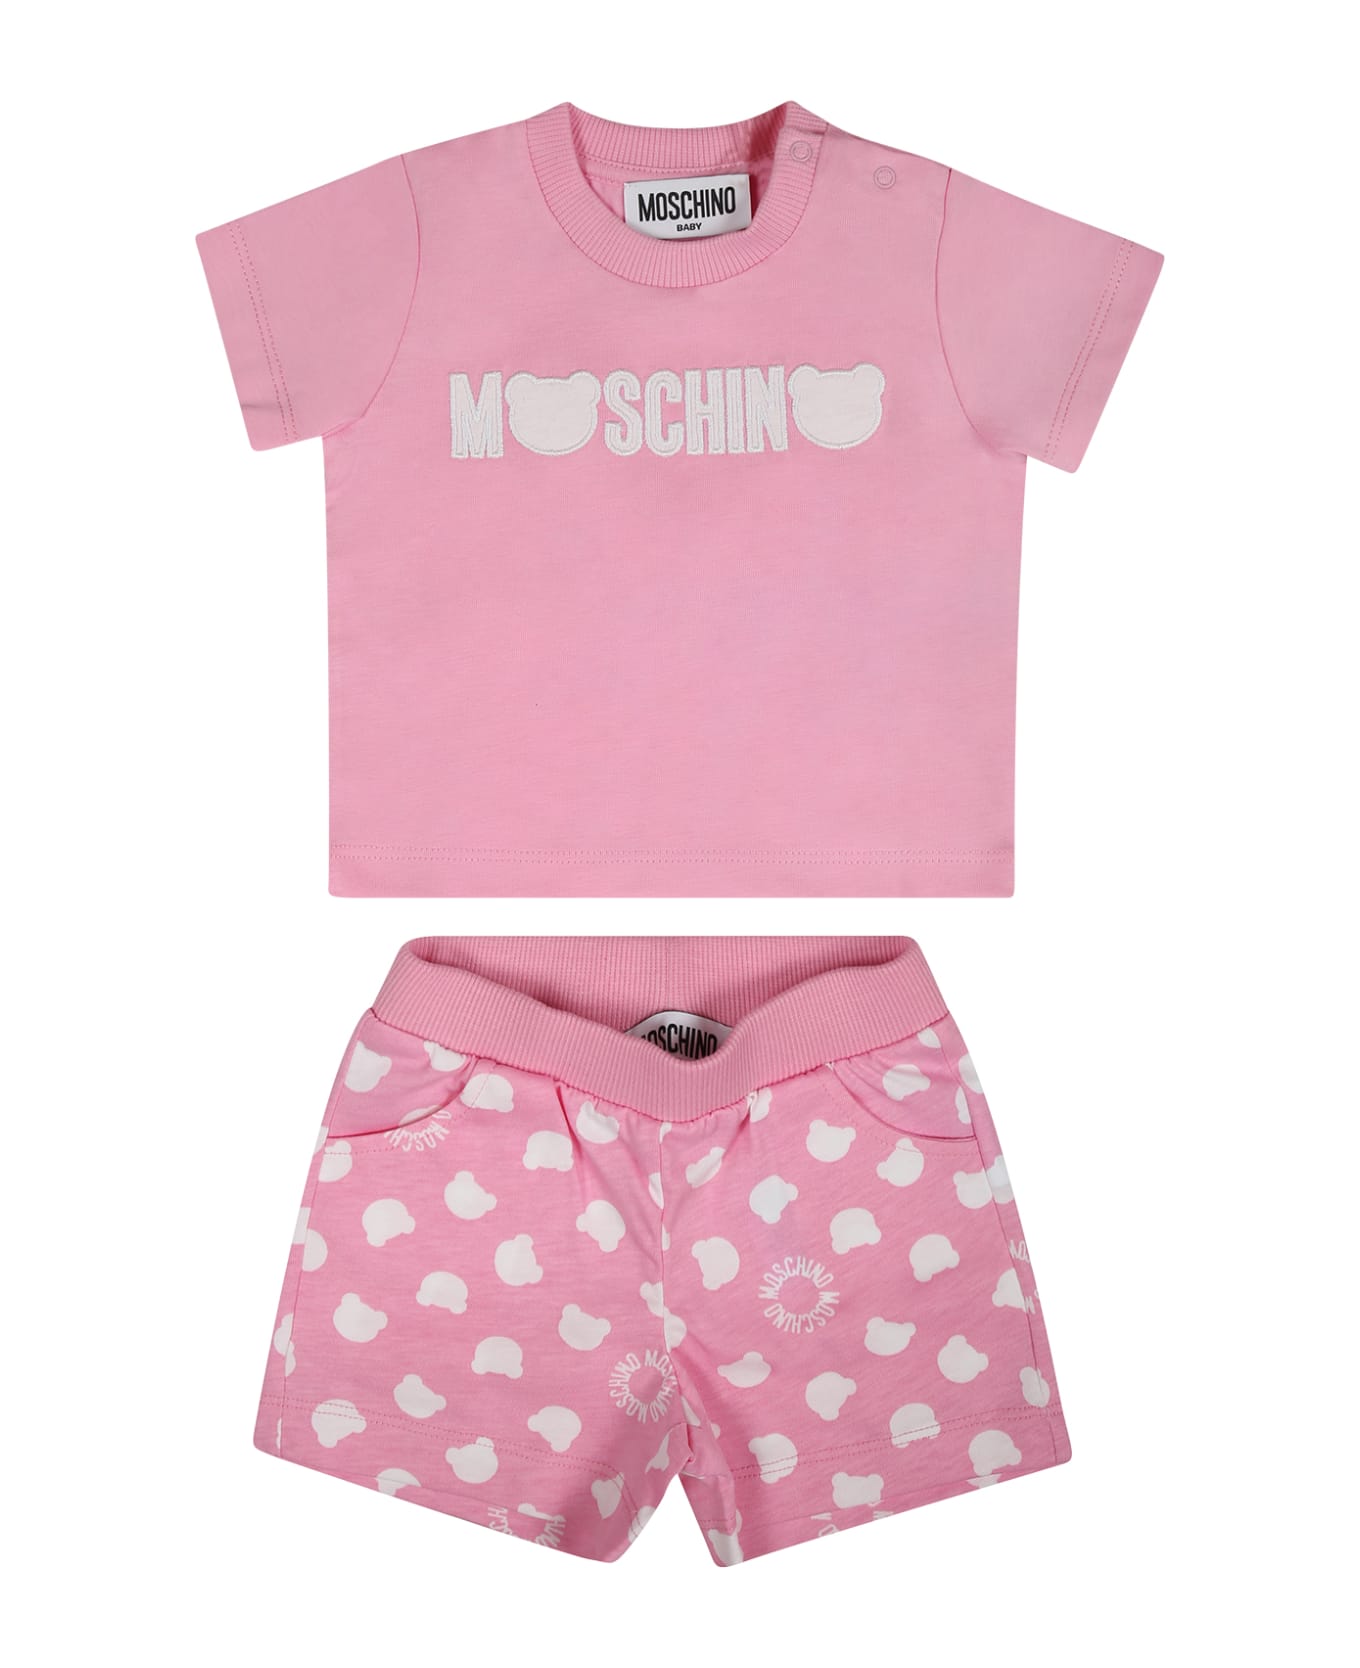 Moschino Pink Outfit For Baby Girl With Logo - Pink ボトムス